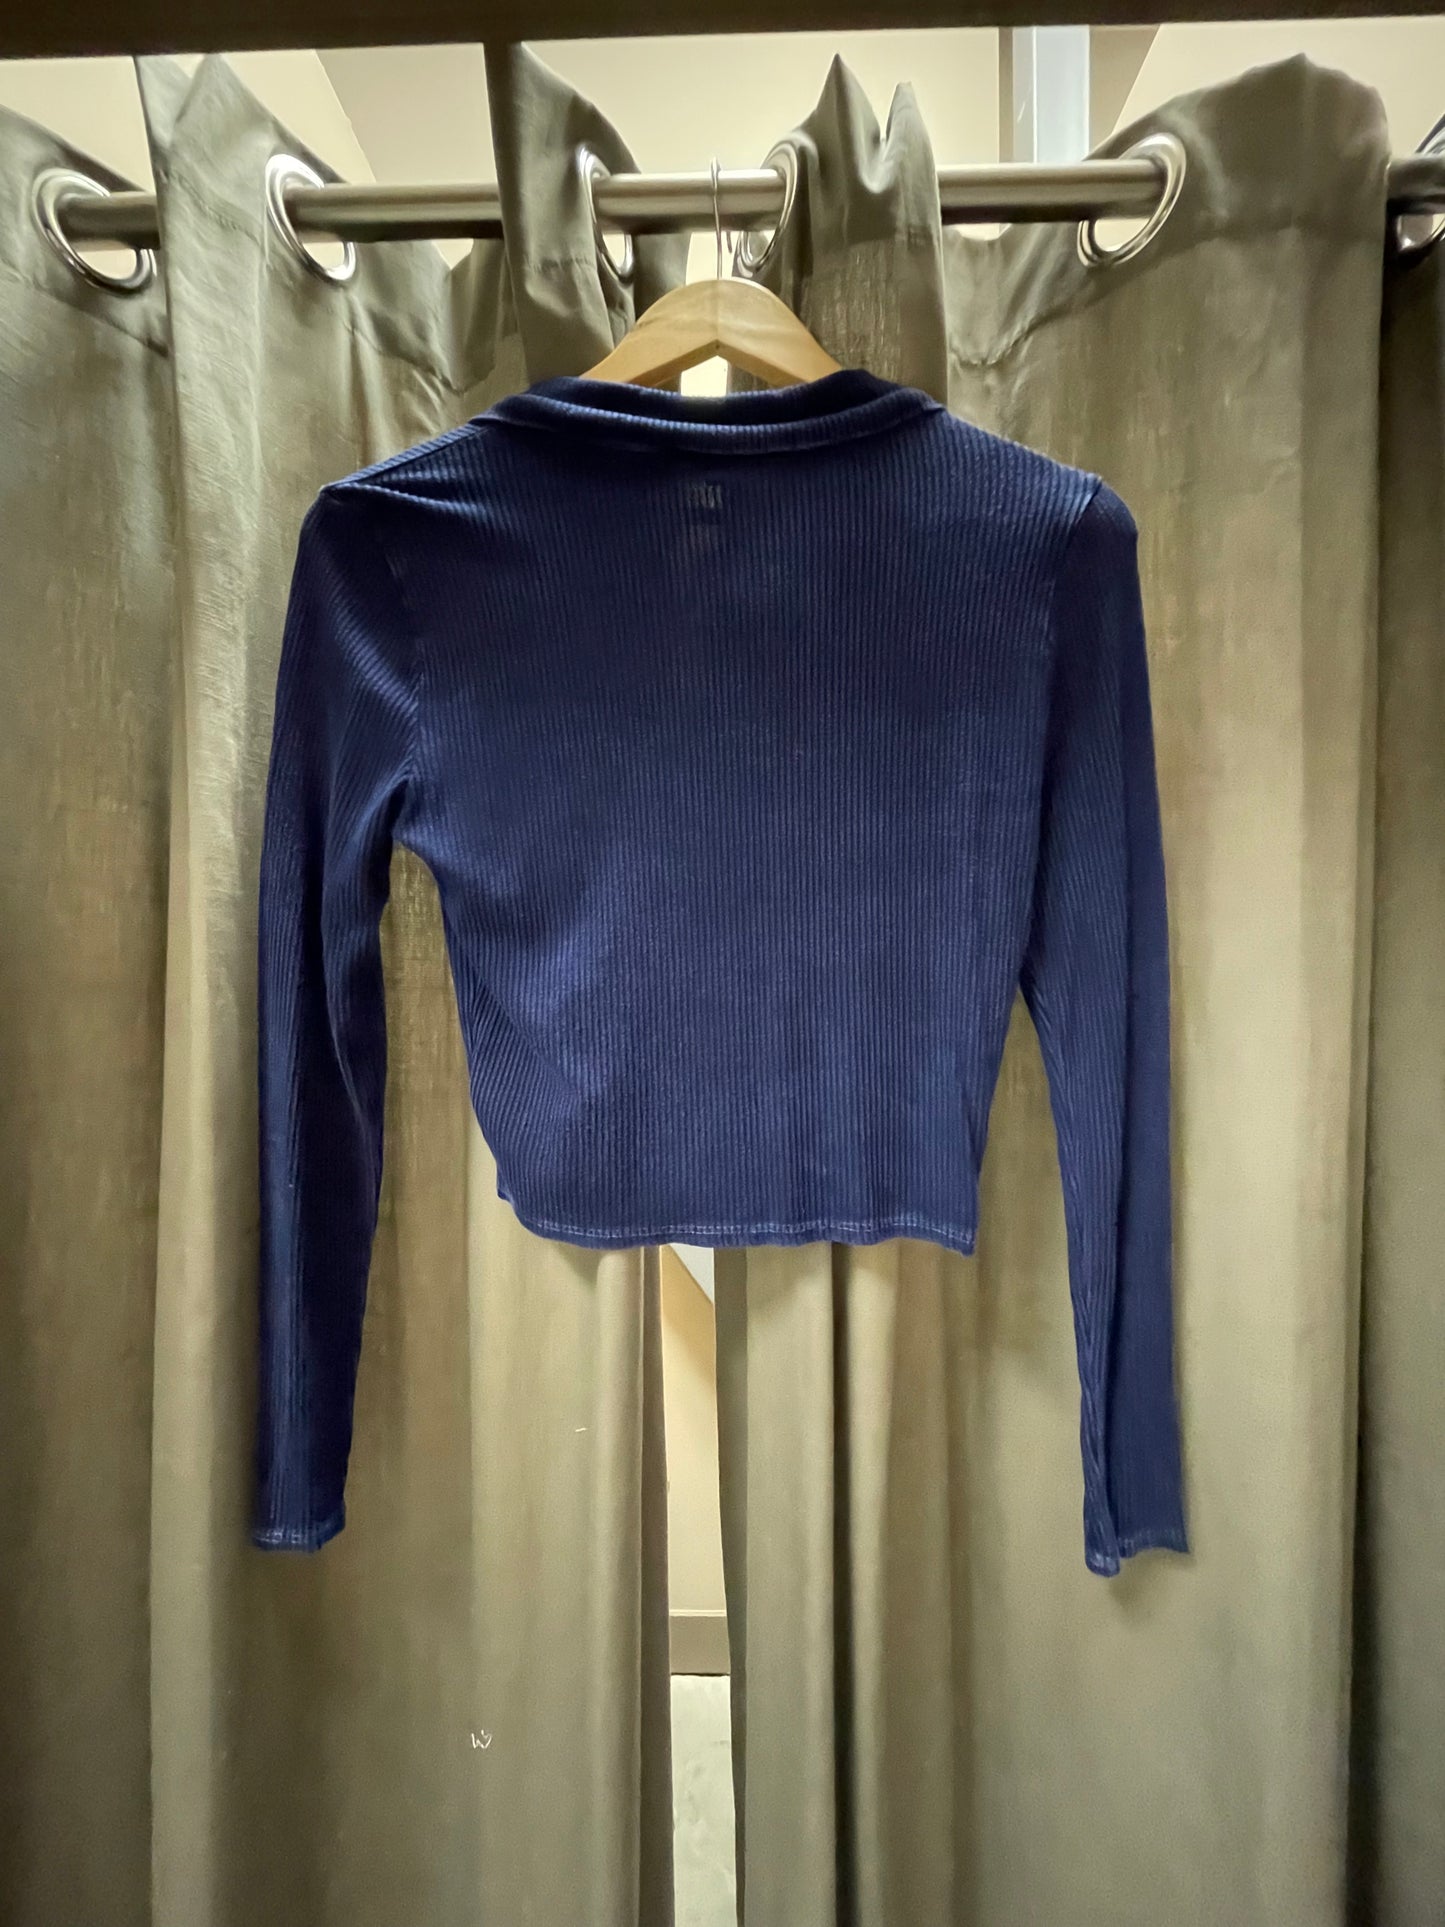 COLLARED MINERAL LONG SLEEVE TOP